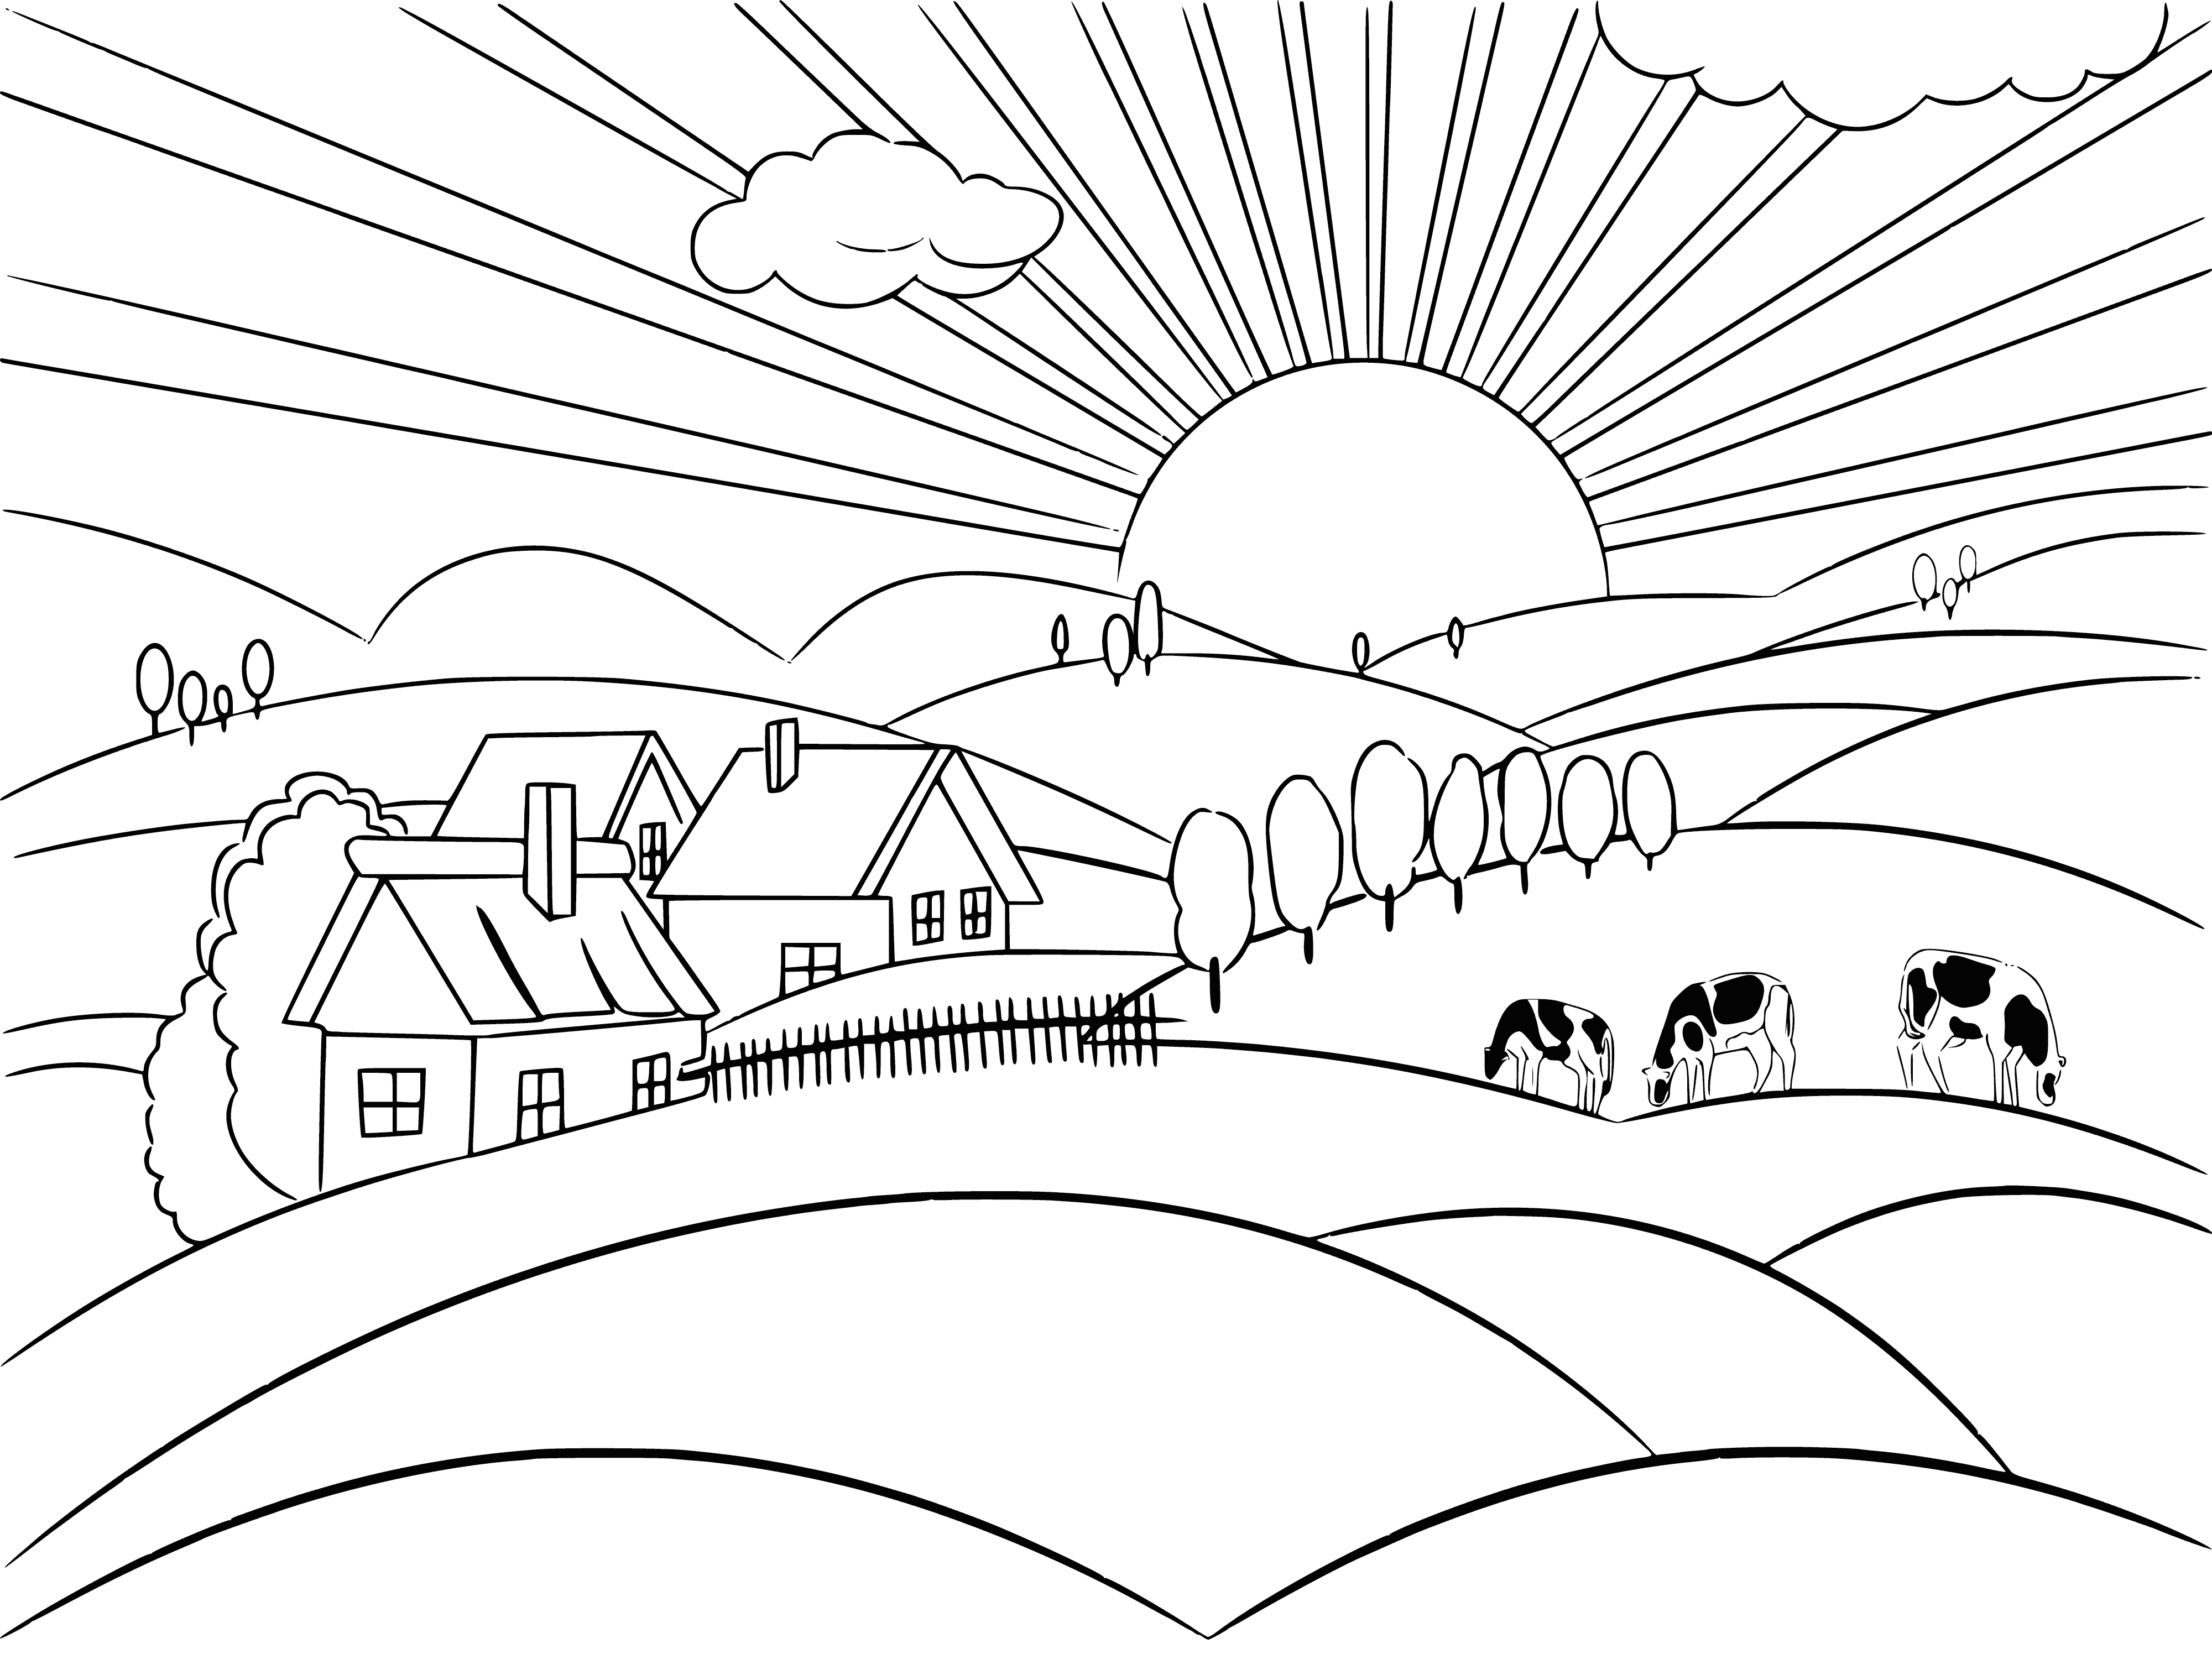 Paysage paisible coloriage